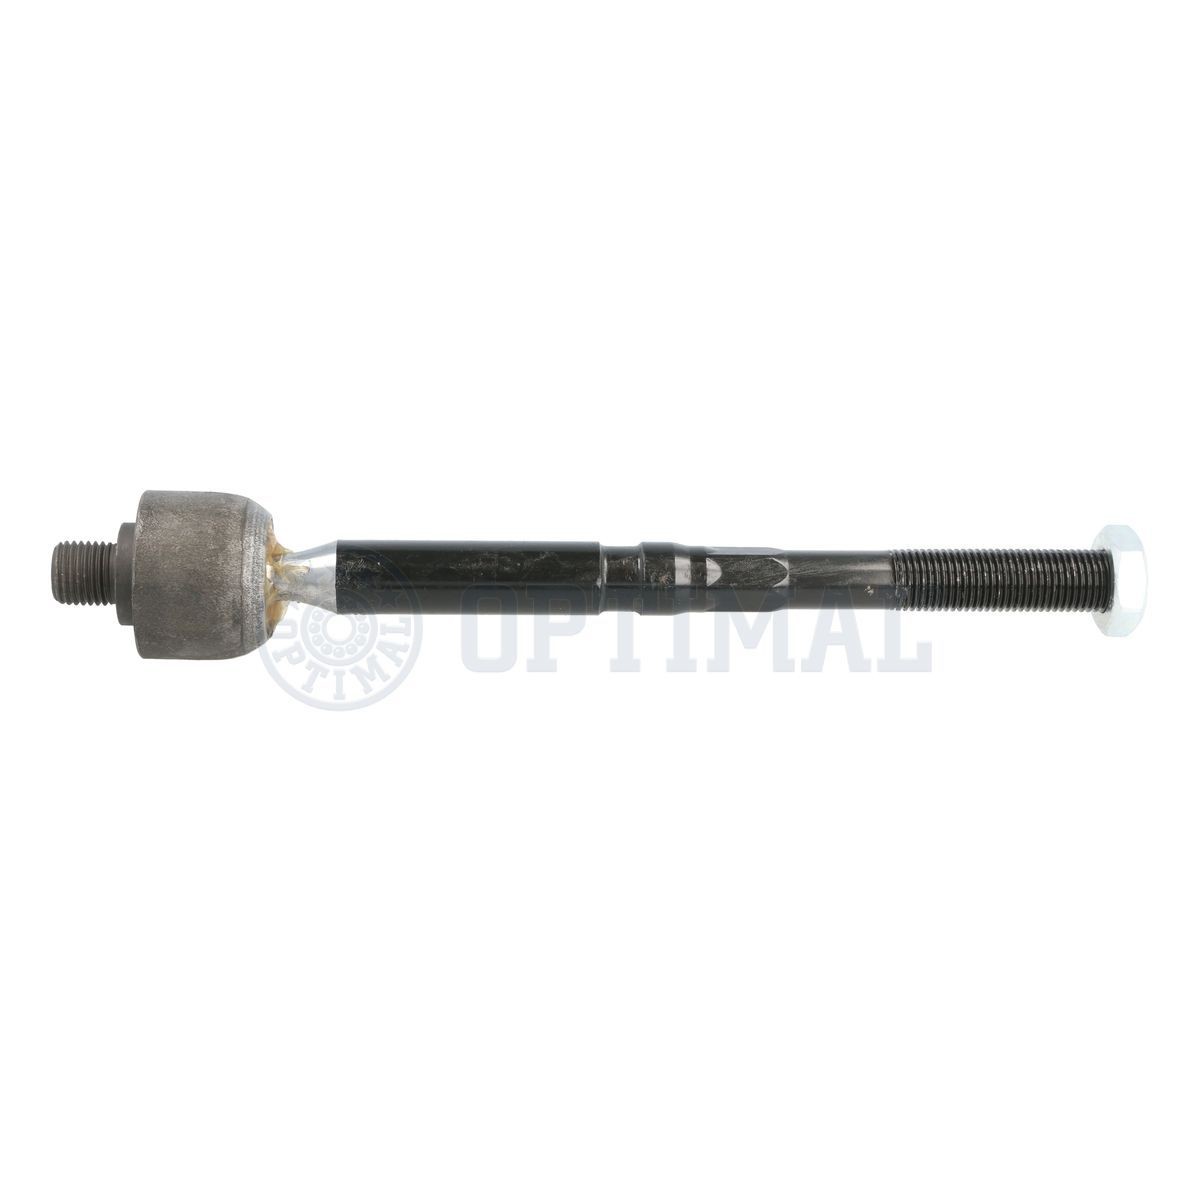 OPTIMAL Front Axle Right, M14 x 1,50 RHT M, 213 mm Length: 213mm Tie rod axle joint G2-1291 buy